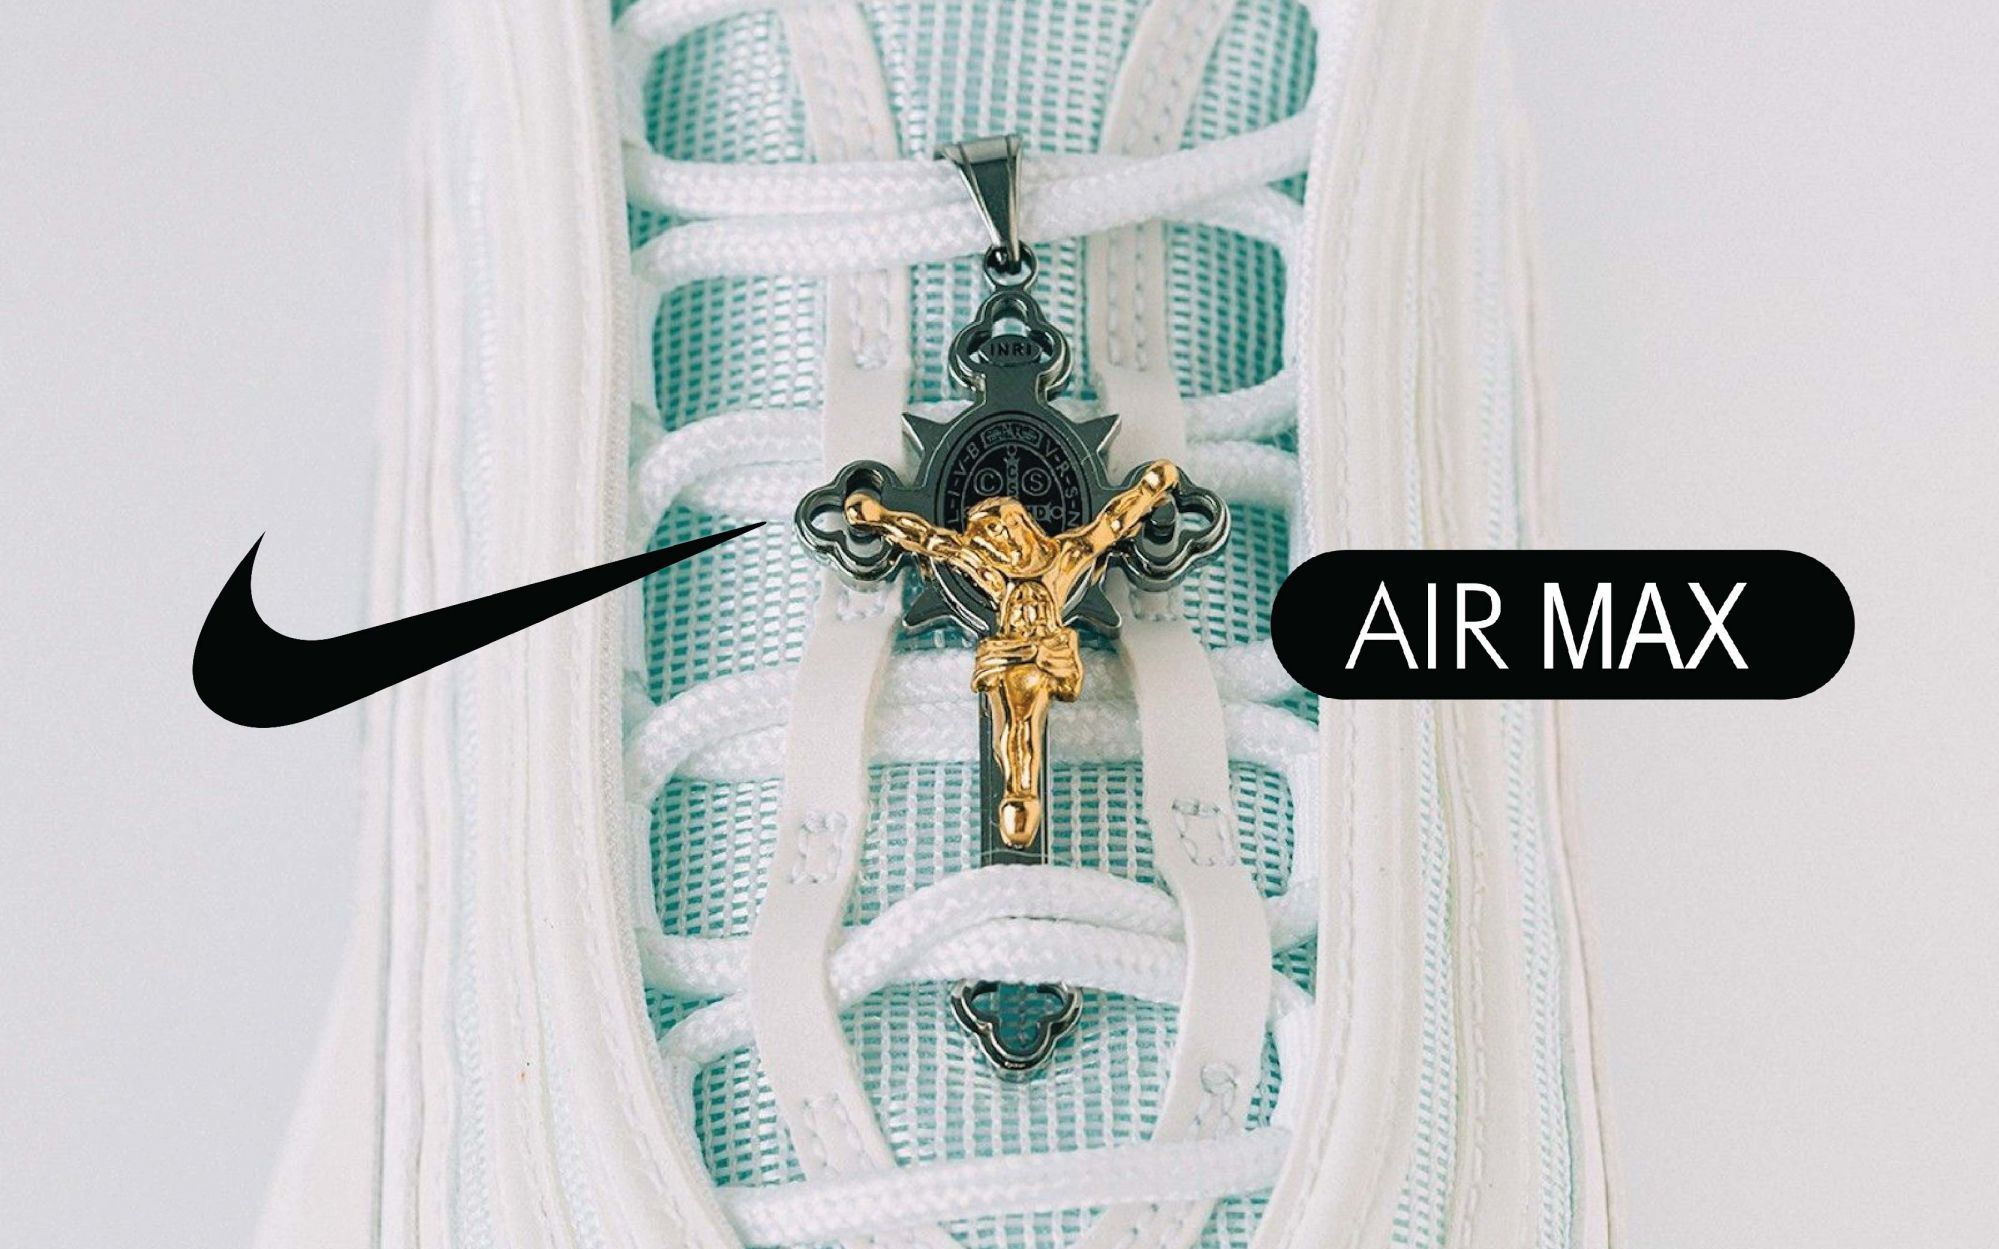 The Nike Air Max 97 with crucifix and water